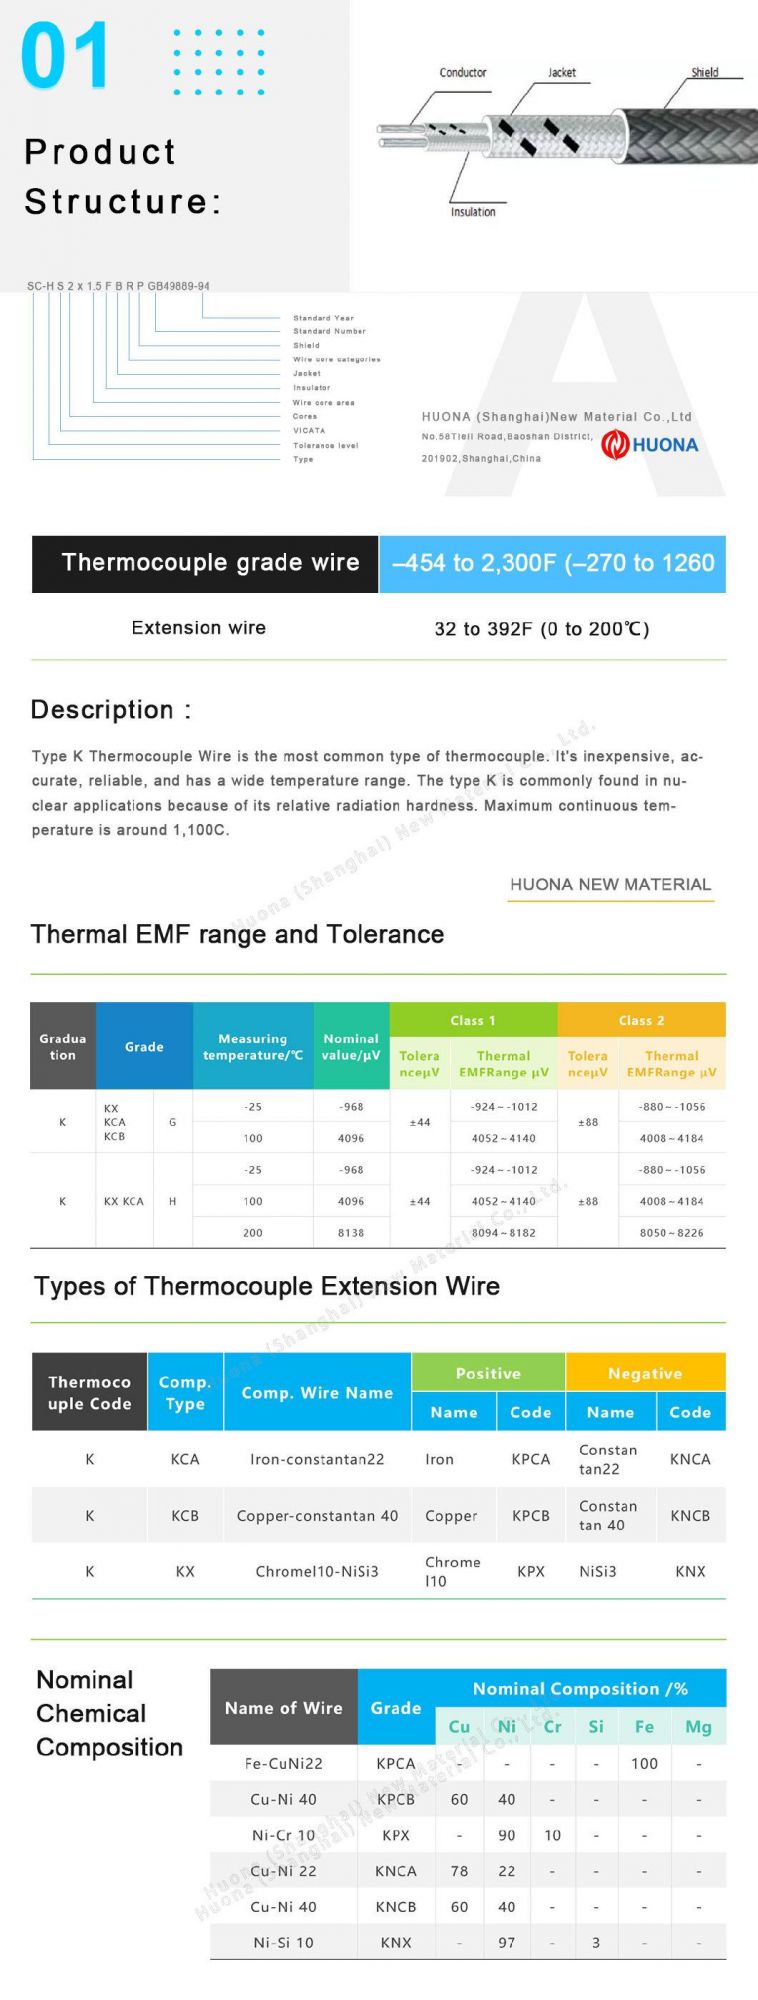 Type R/B/S Platinum-Rhodium Thermocouple Wire/Cable Manufacturer